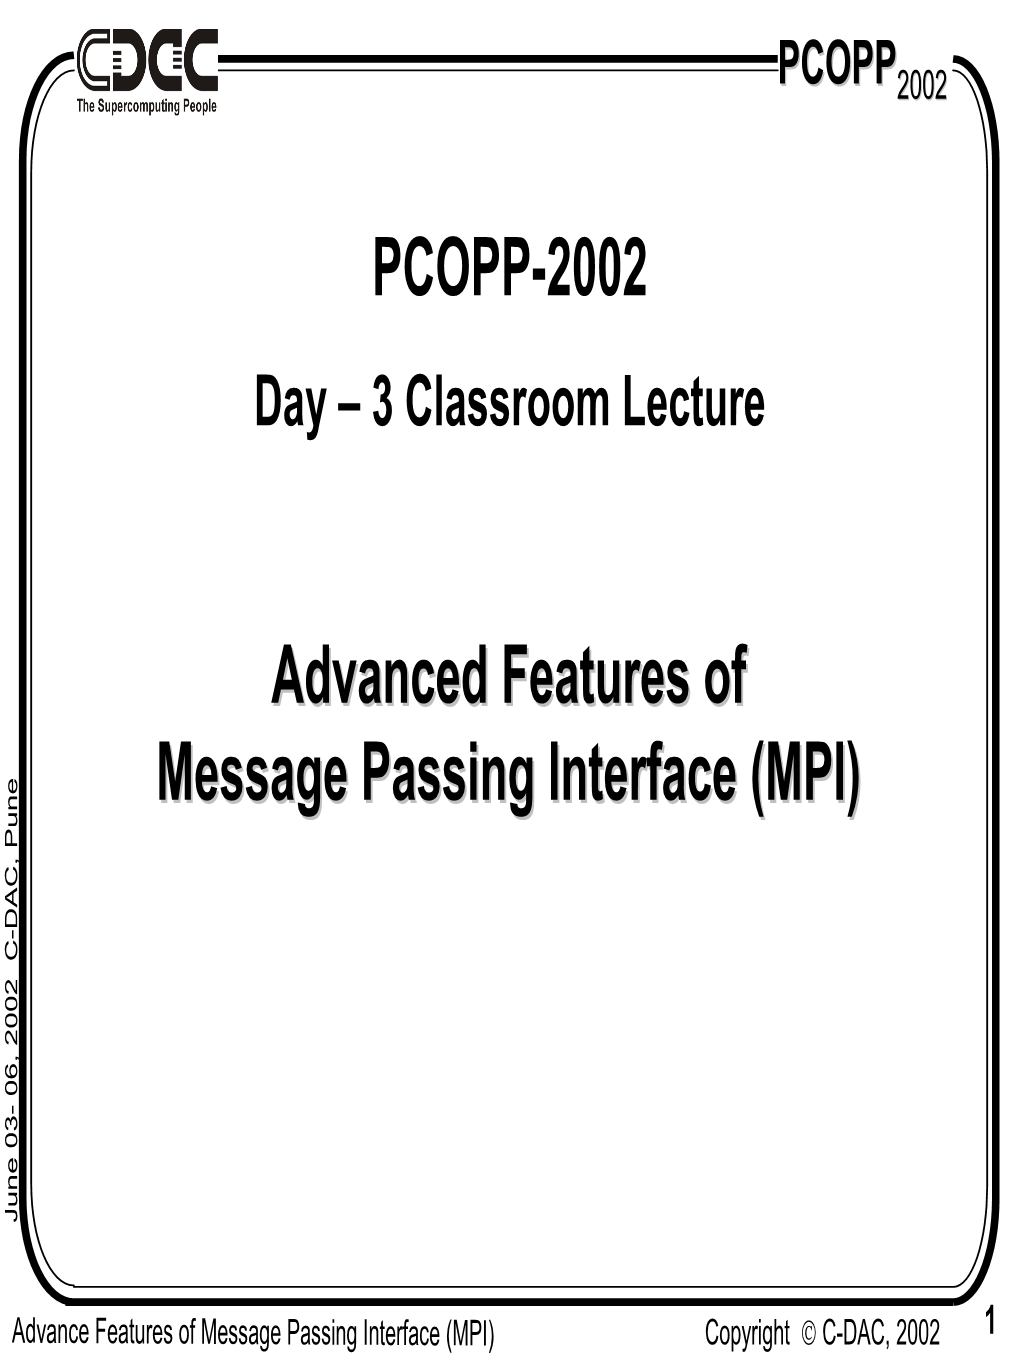 Advanced Features of Message Passing Interface (MPI) PCOPP-2002